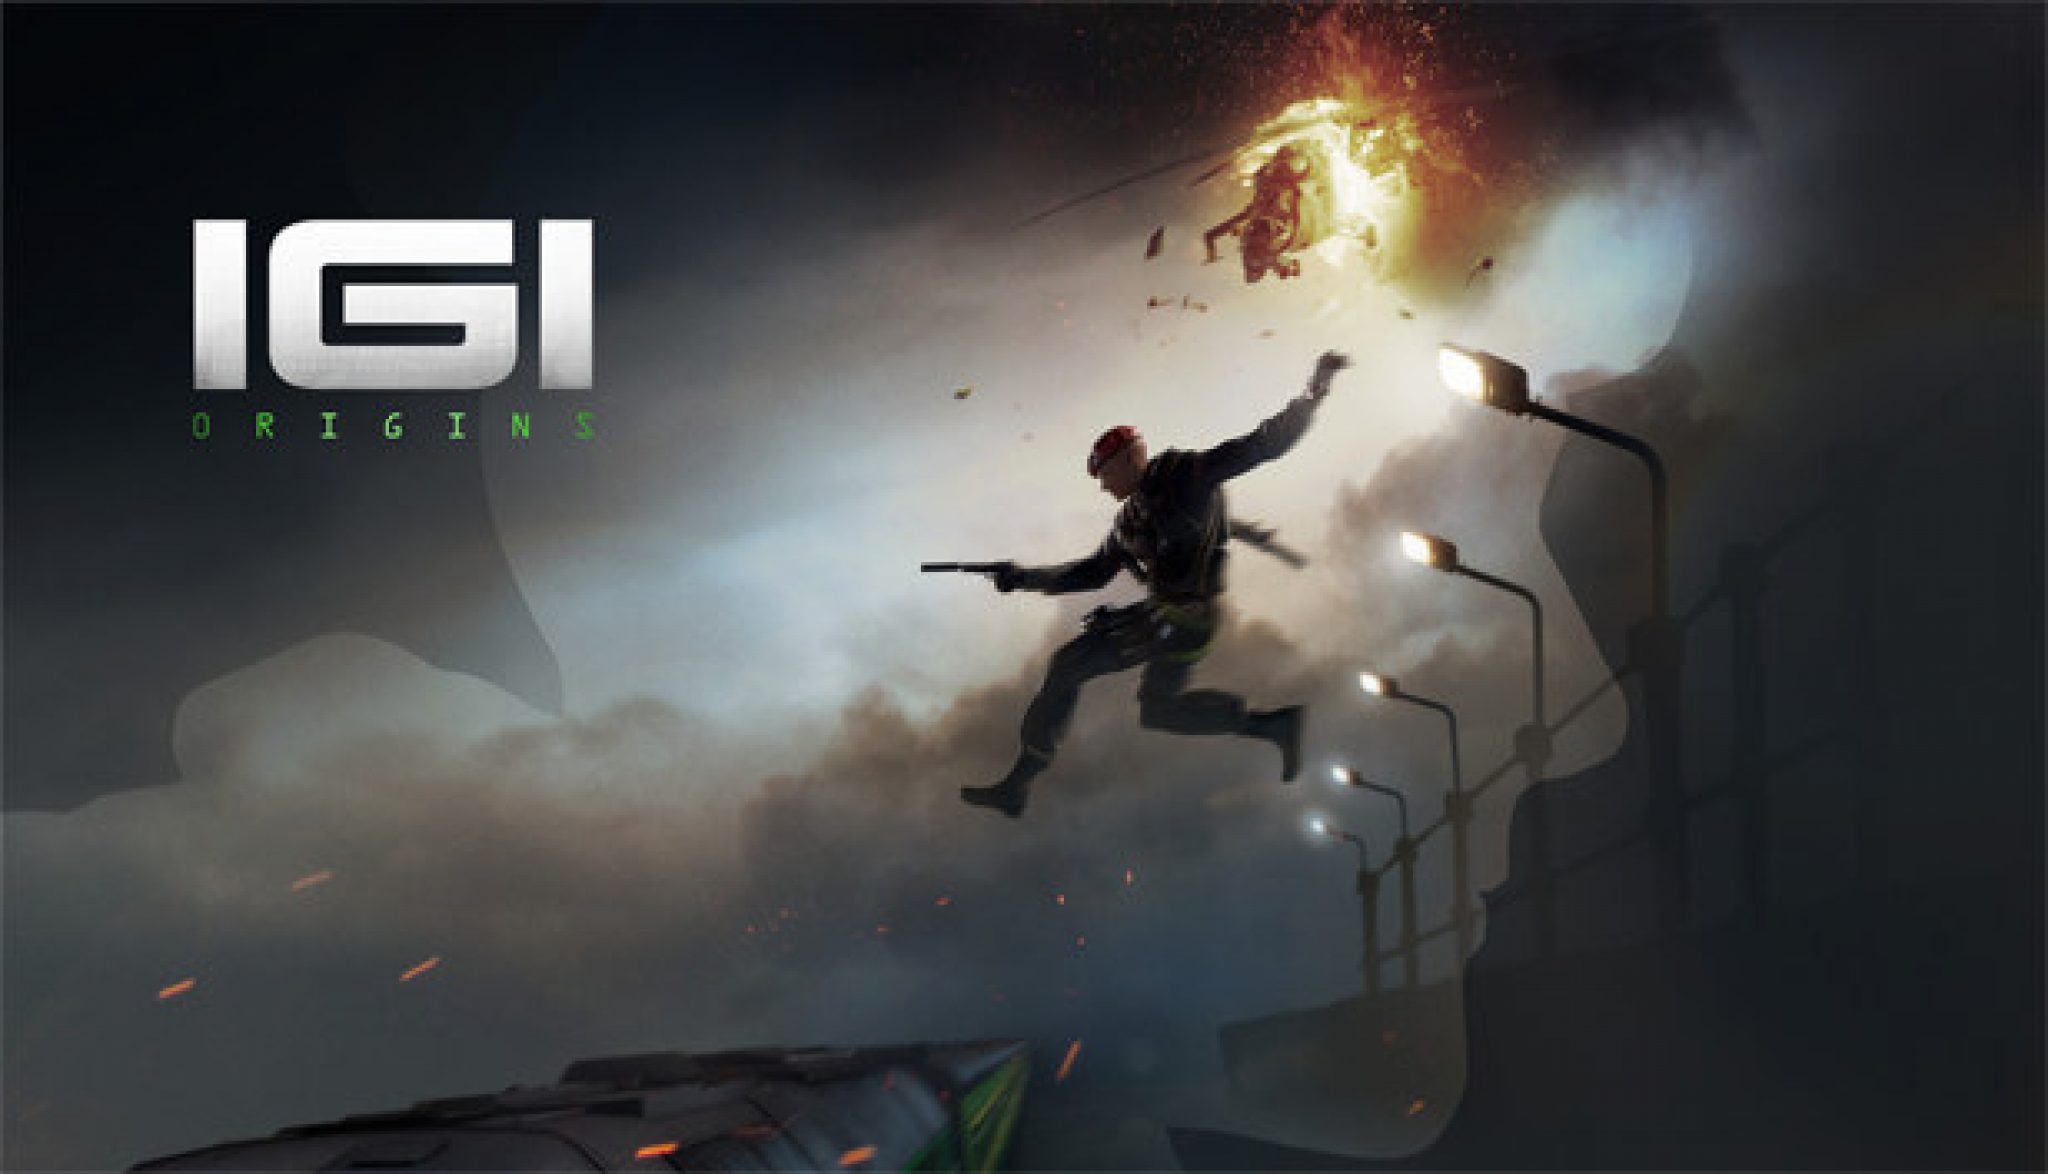 project igi 1 game free download full version for pc